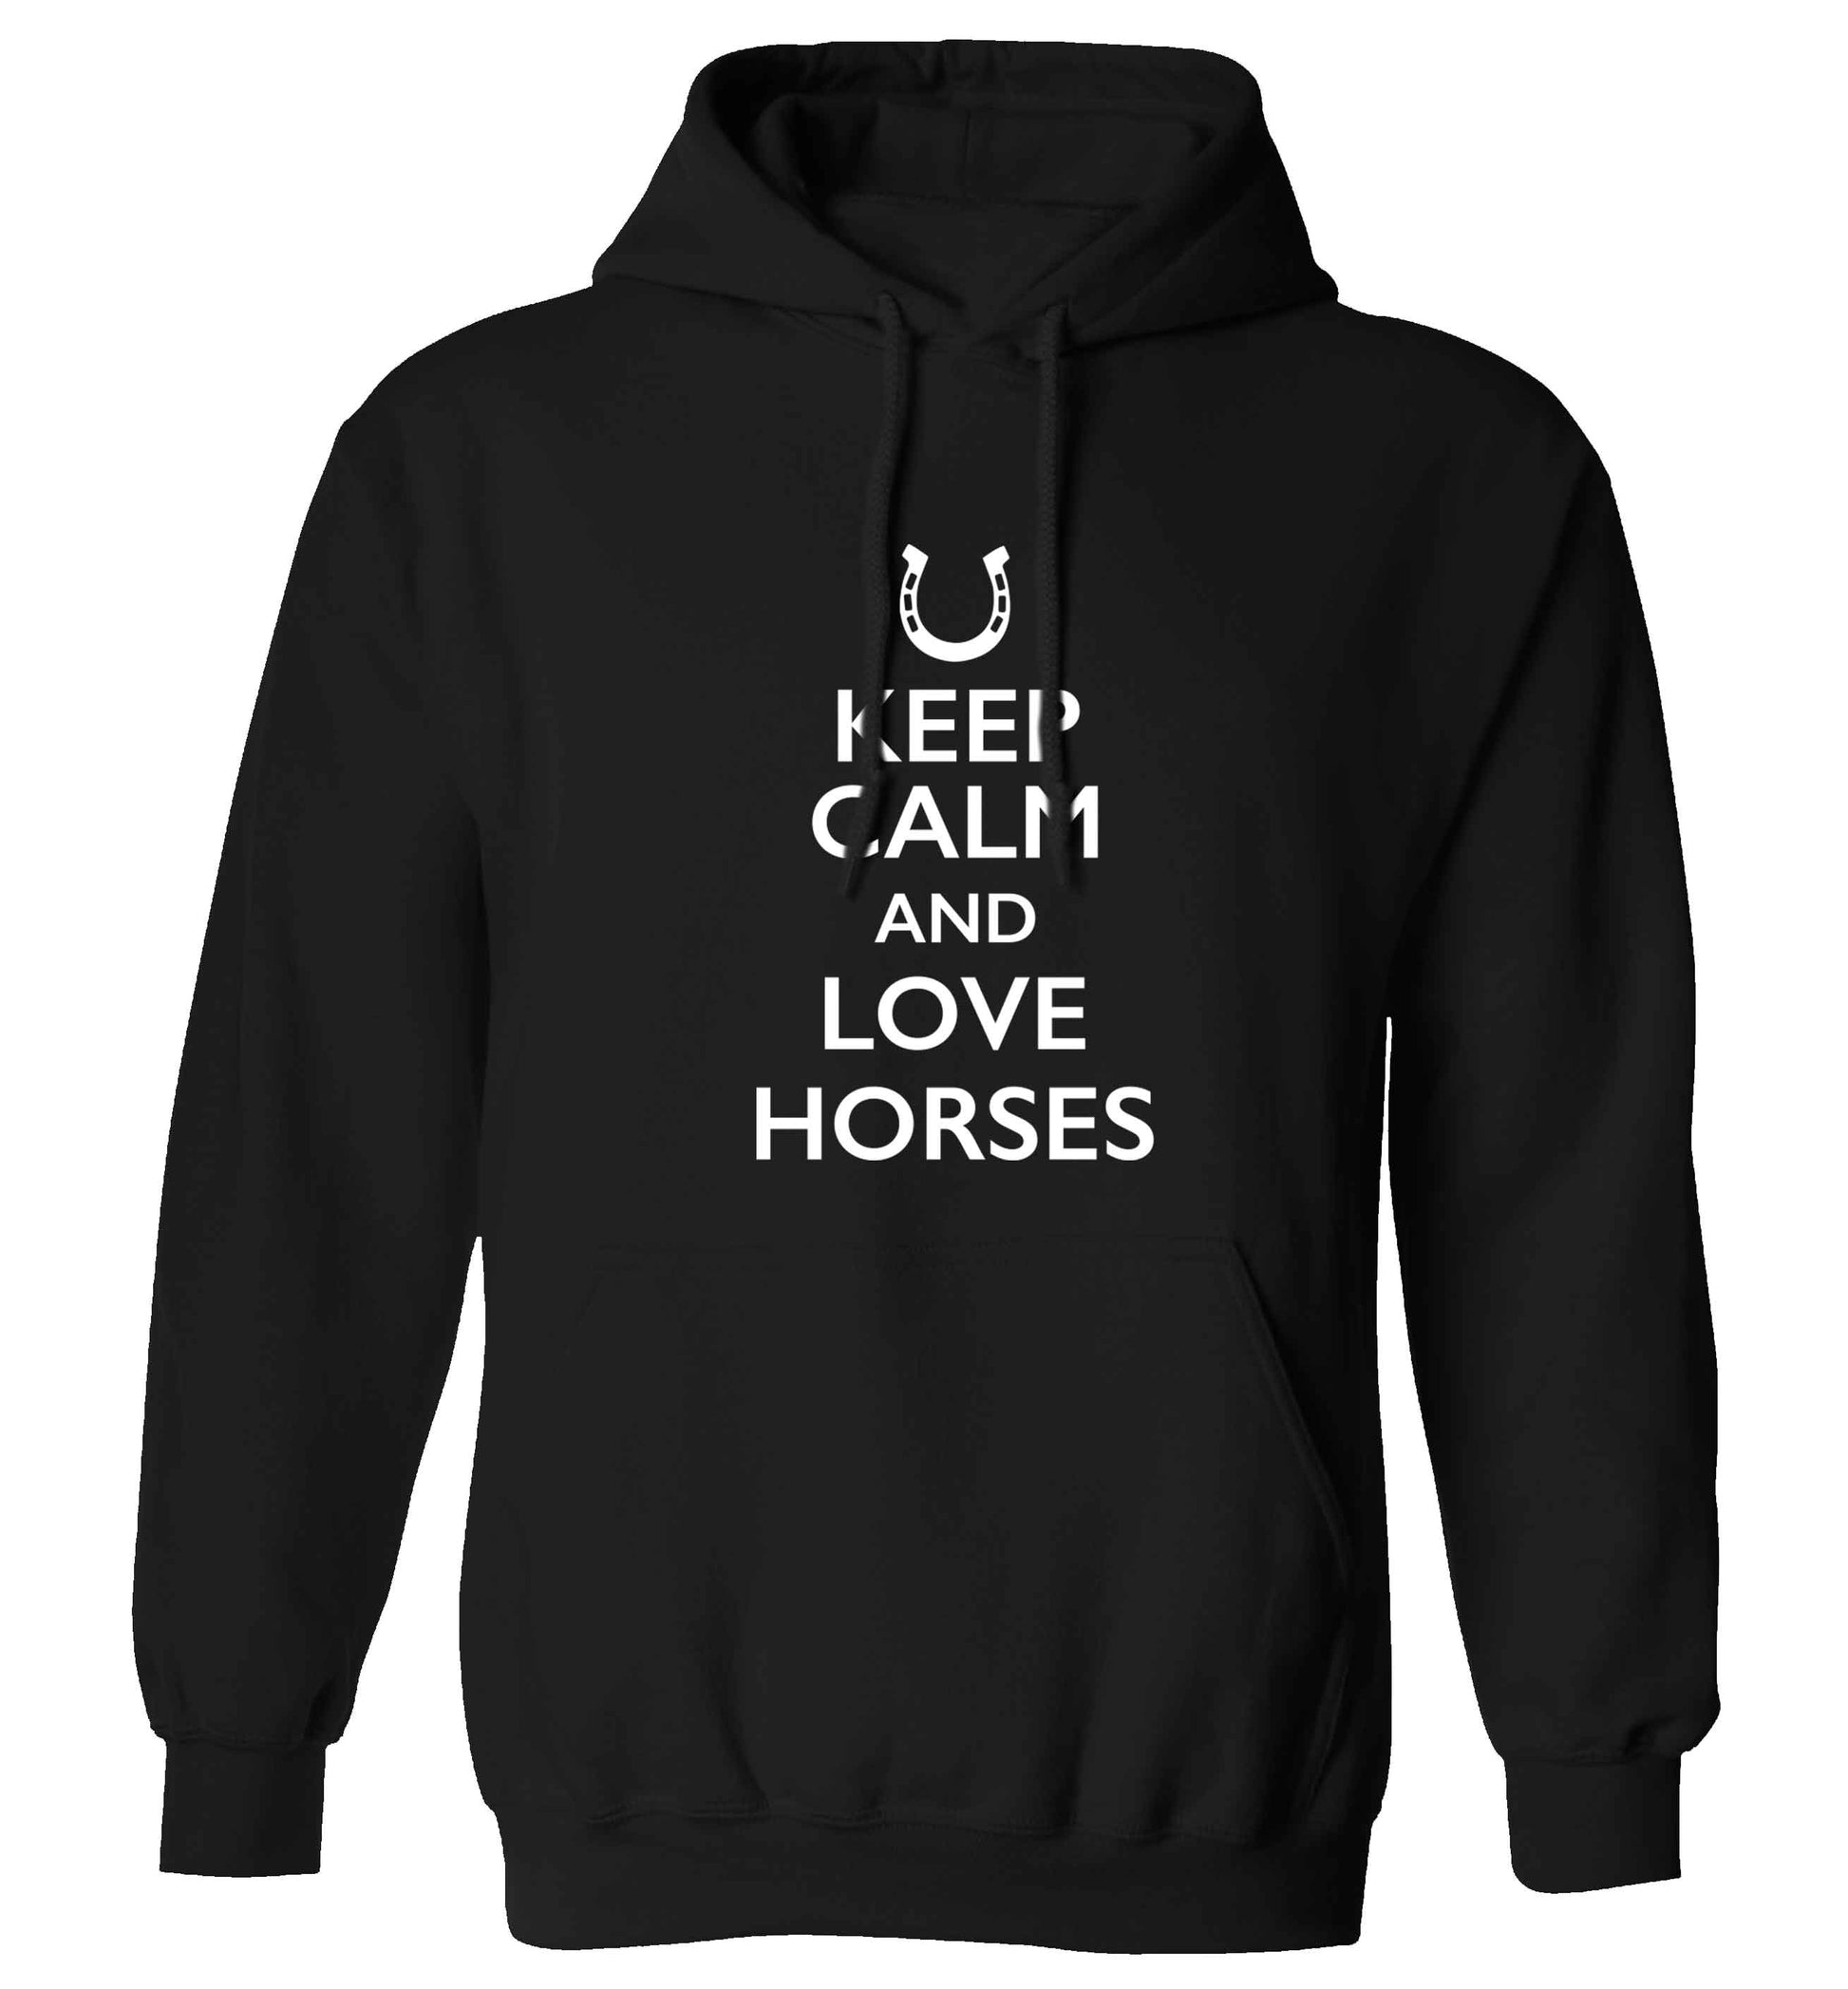 Keep calm and love horses adults unisex black hoodie 2XL